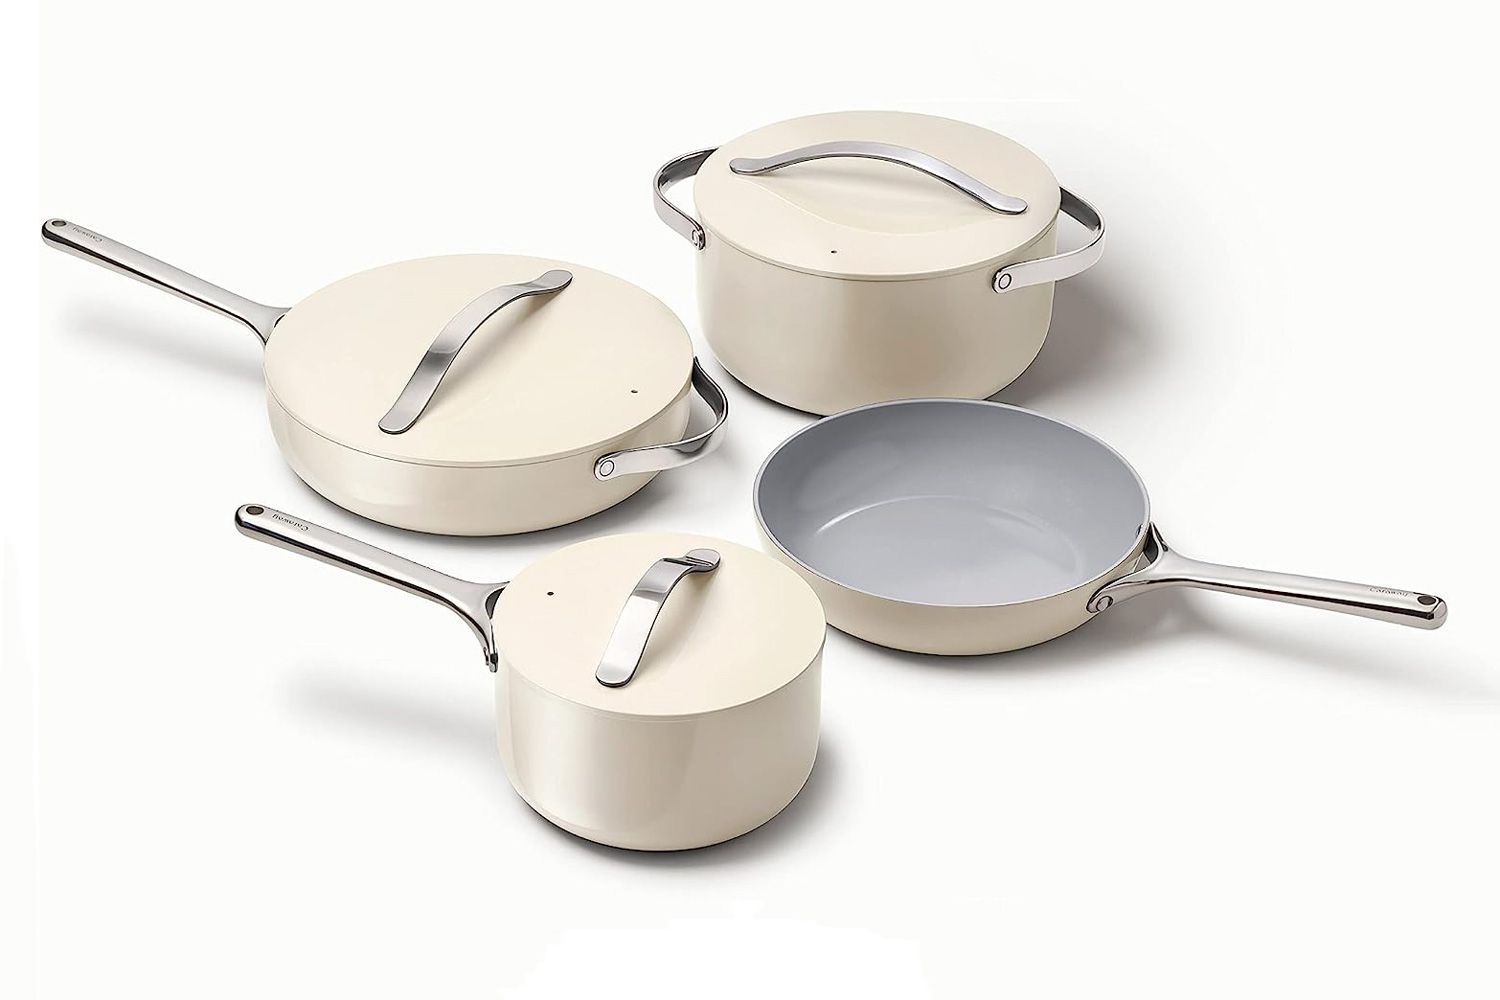 Ceramic Cookware Sets: Reasons To Purchase One